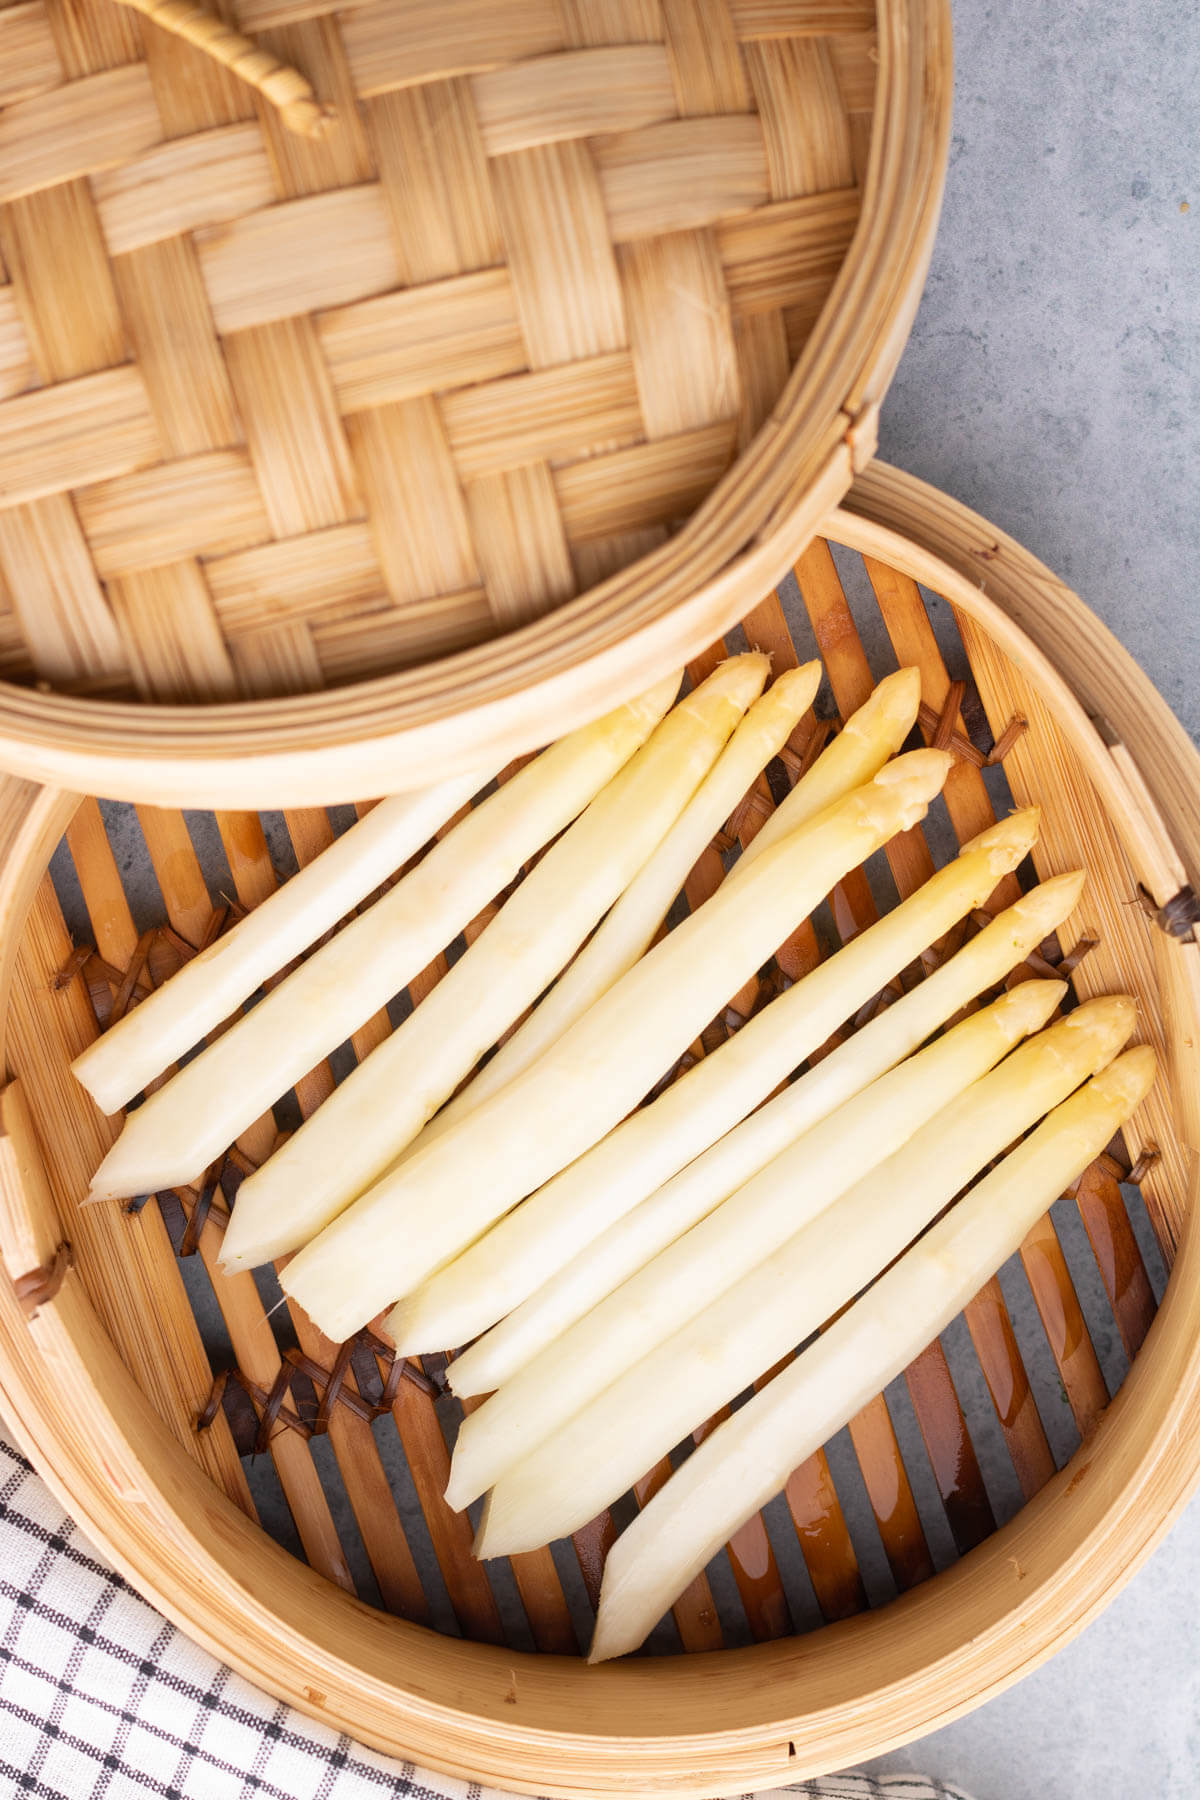 Peeled white asparagus in a bamboo steamer basket.